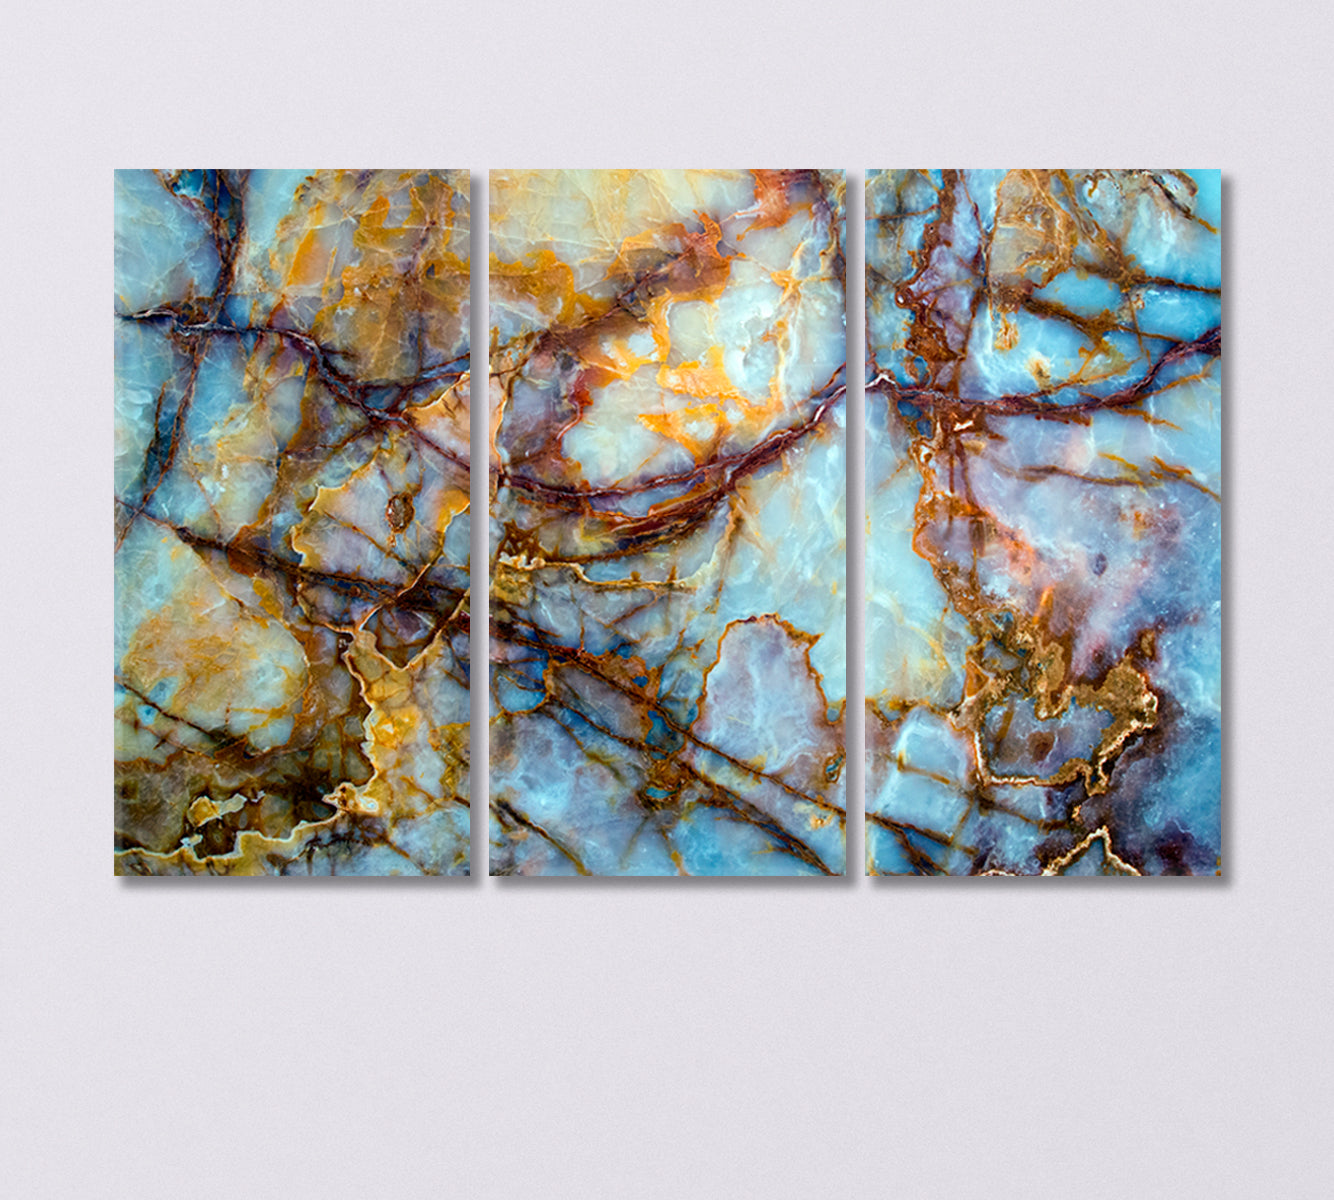 Blue and Gold Onyx Marble Stone Canvas Print-Canvas Print-CetArt-3 Panels-36x24 inches-CetArt